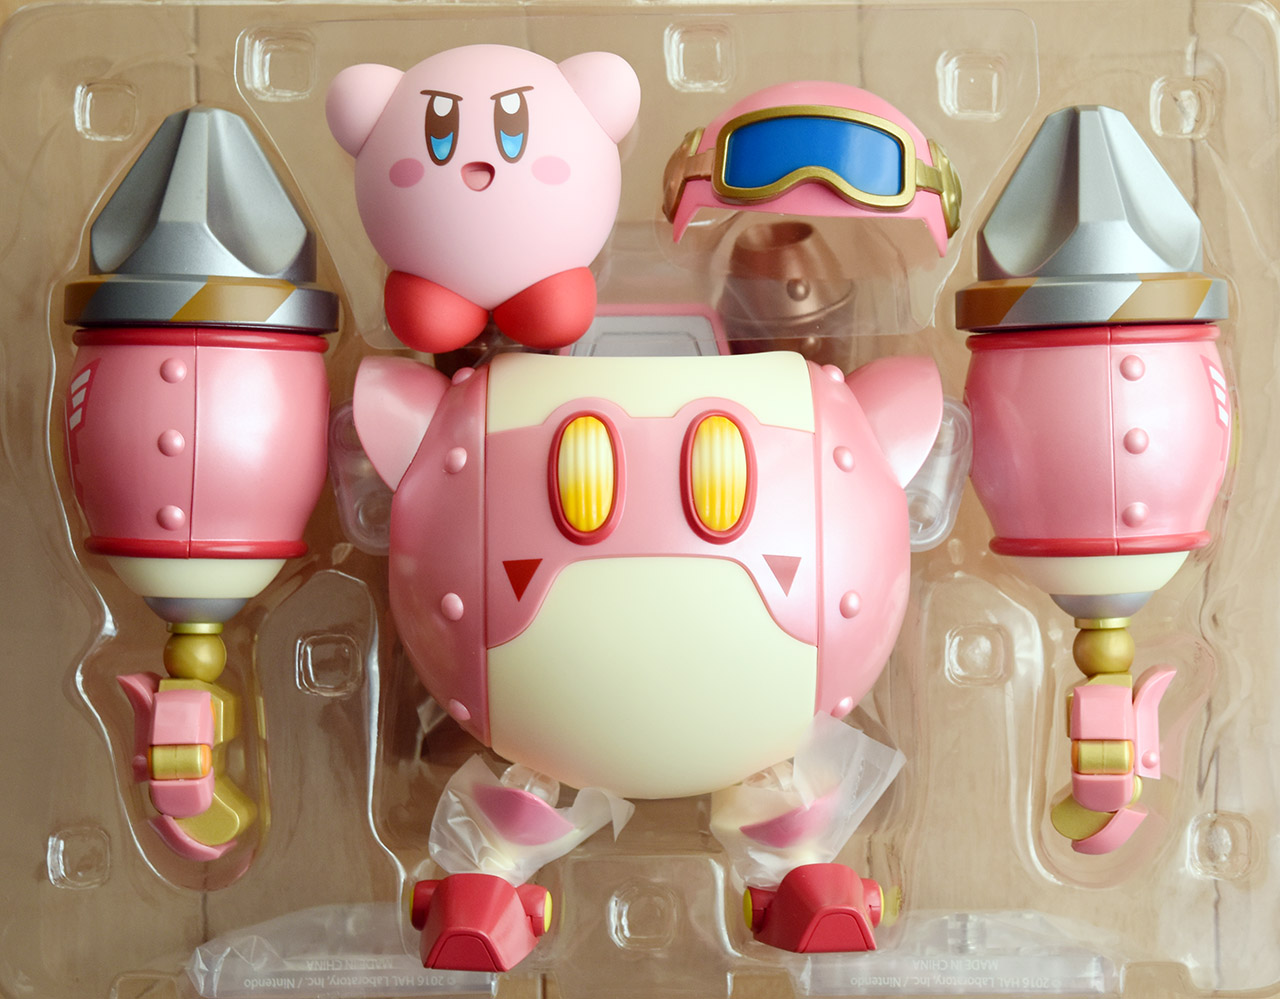 Nendoroid More Robobot Armor And Kirby Unboxing Hobbylinktv